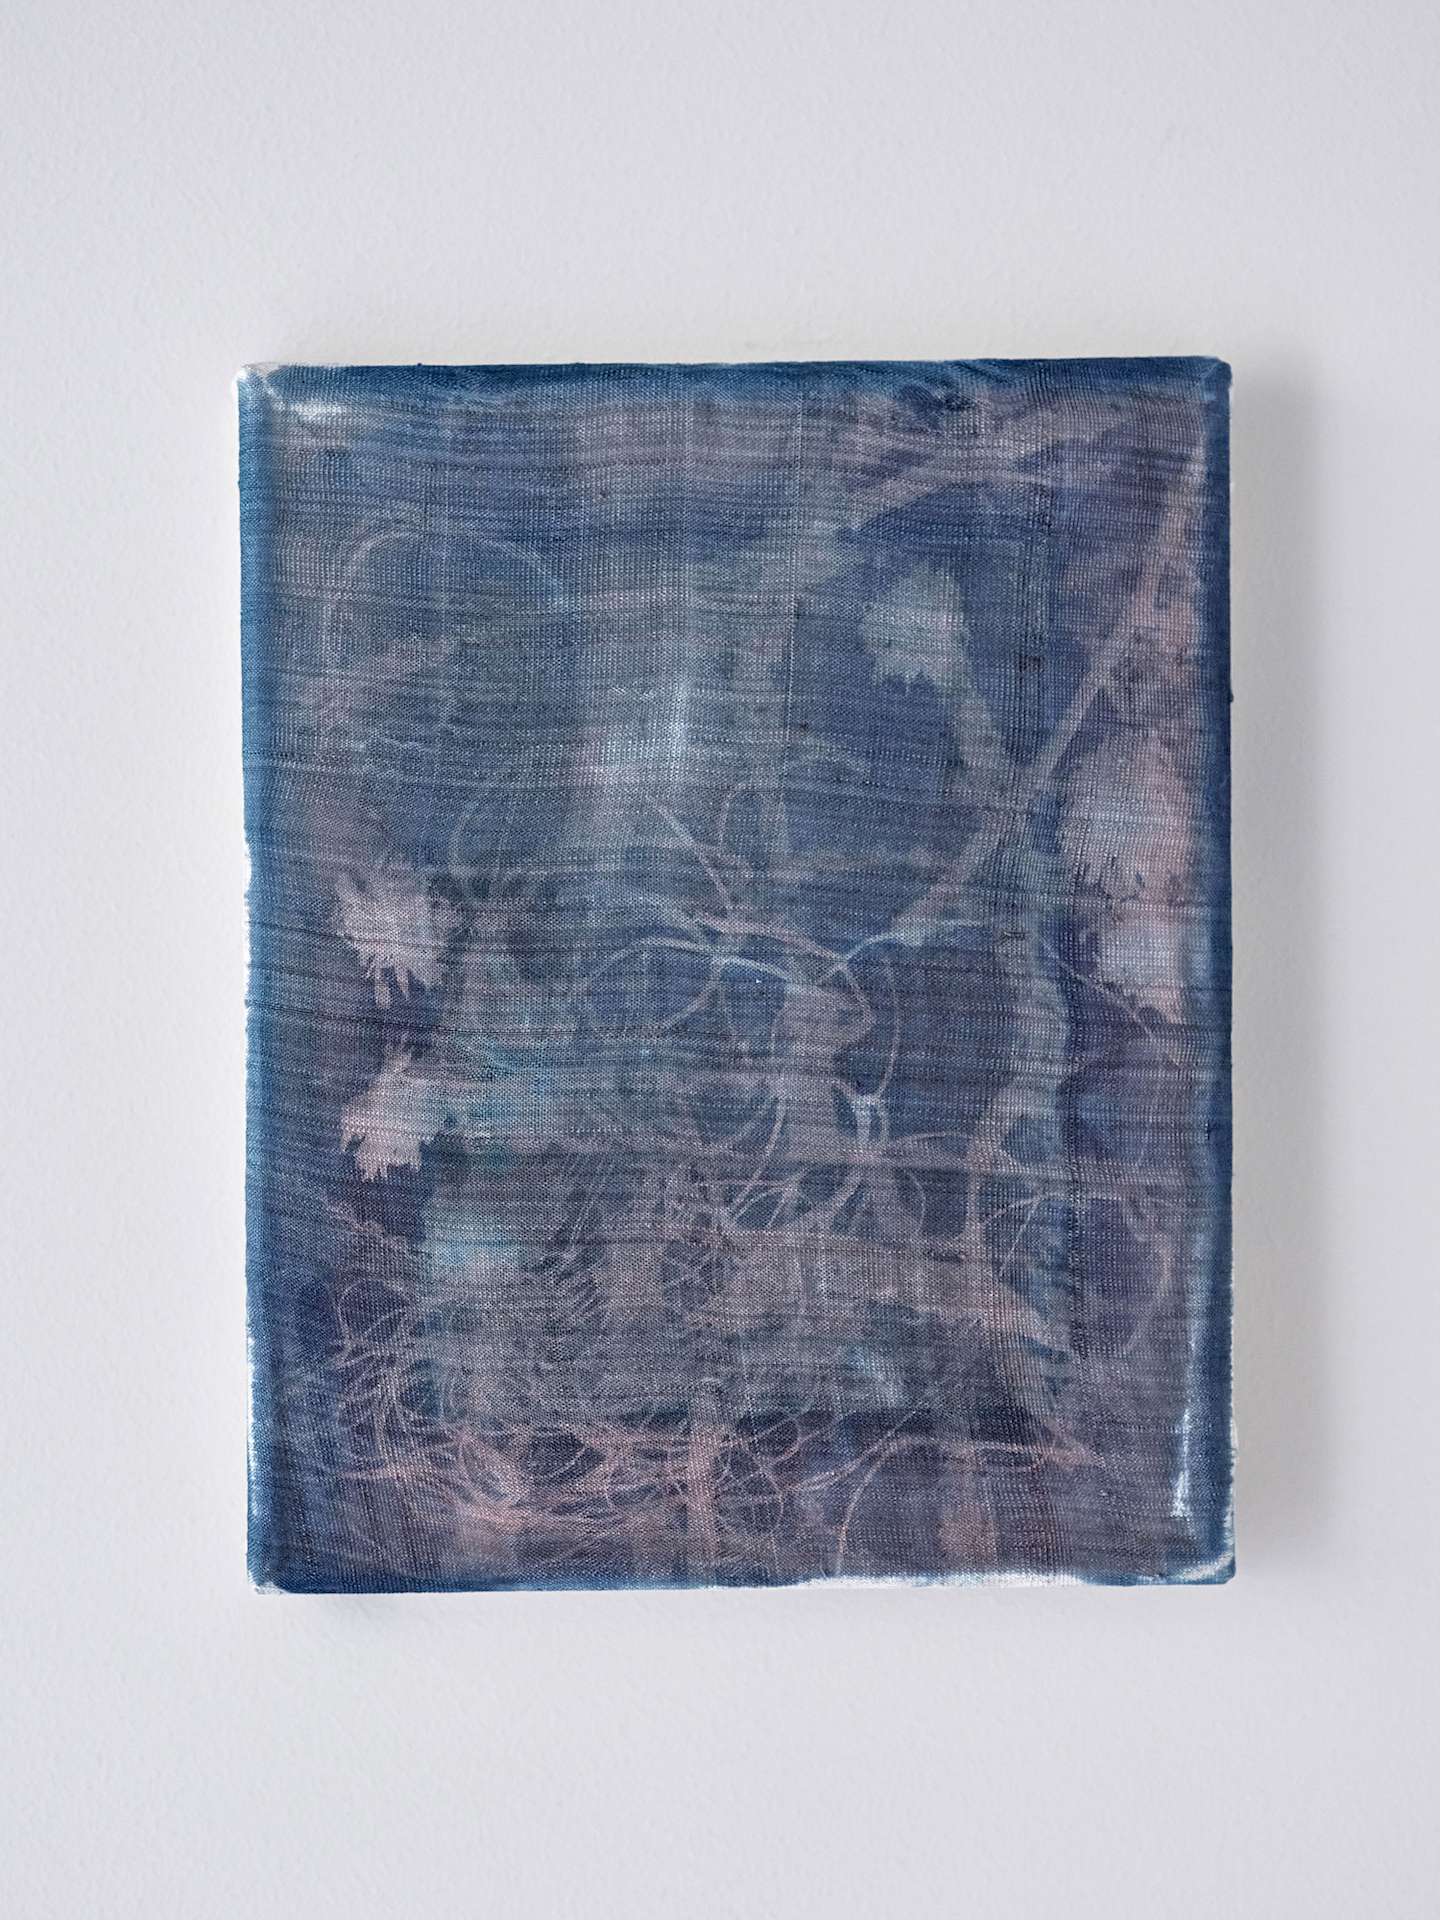 Olga Grotova, Worm Nest, Cyanotype on hand-made silk, 25.5 x 20.5 cm, 2023, Artworks © The Artist, Courtesy of Schoeni Projects and THE SHOPHOUSE, Photo by Nick Smith